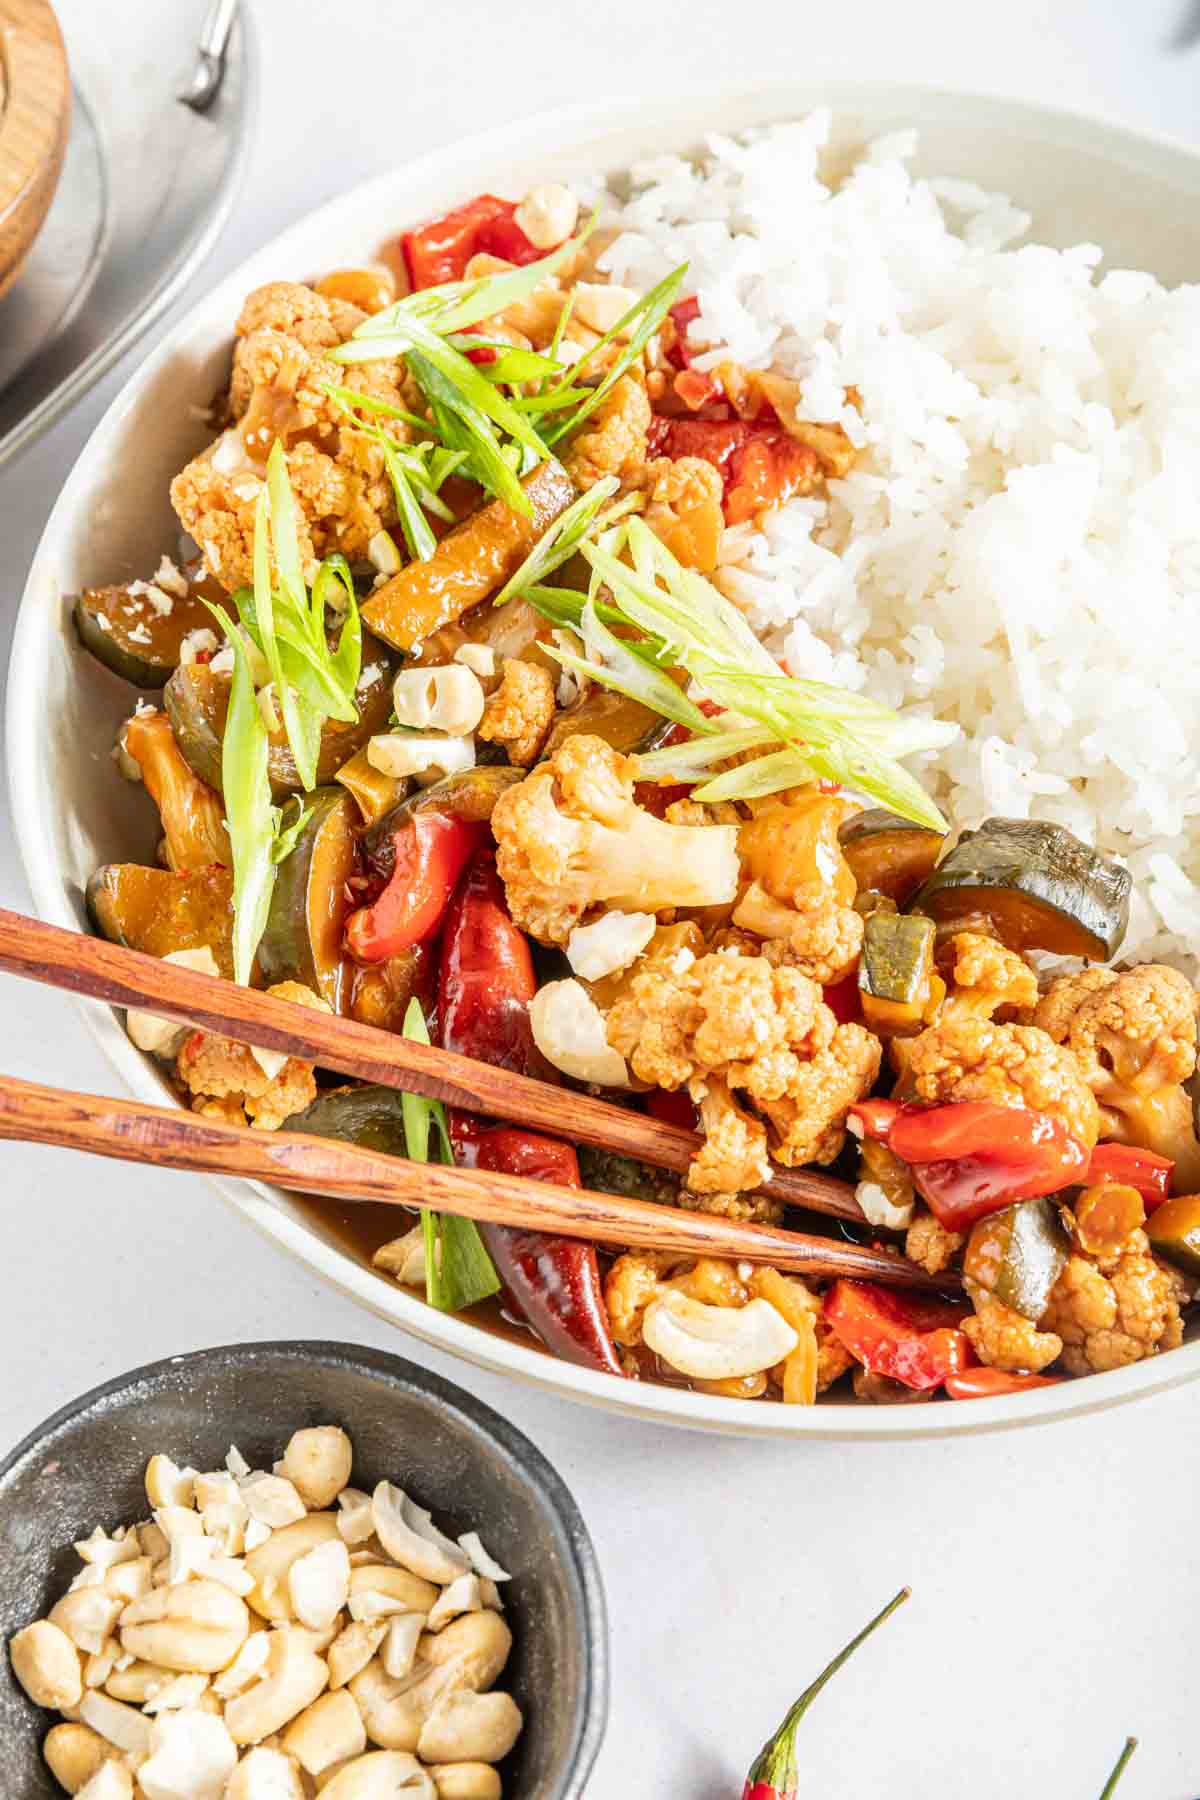 Kung pao cauliflower served in a bowl with white rice with chopsticks, next to a dish of crushed cashews.